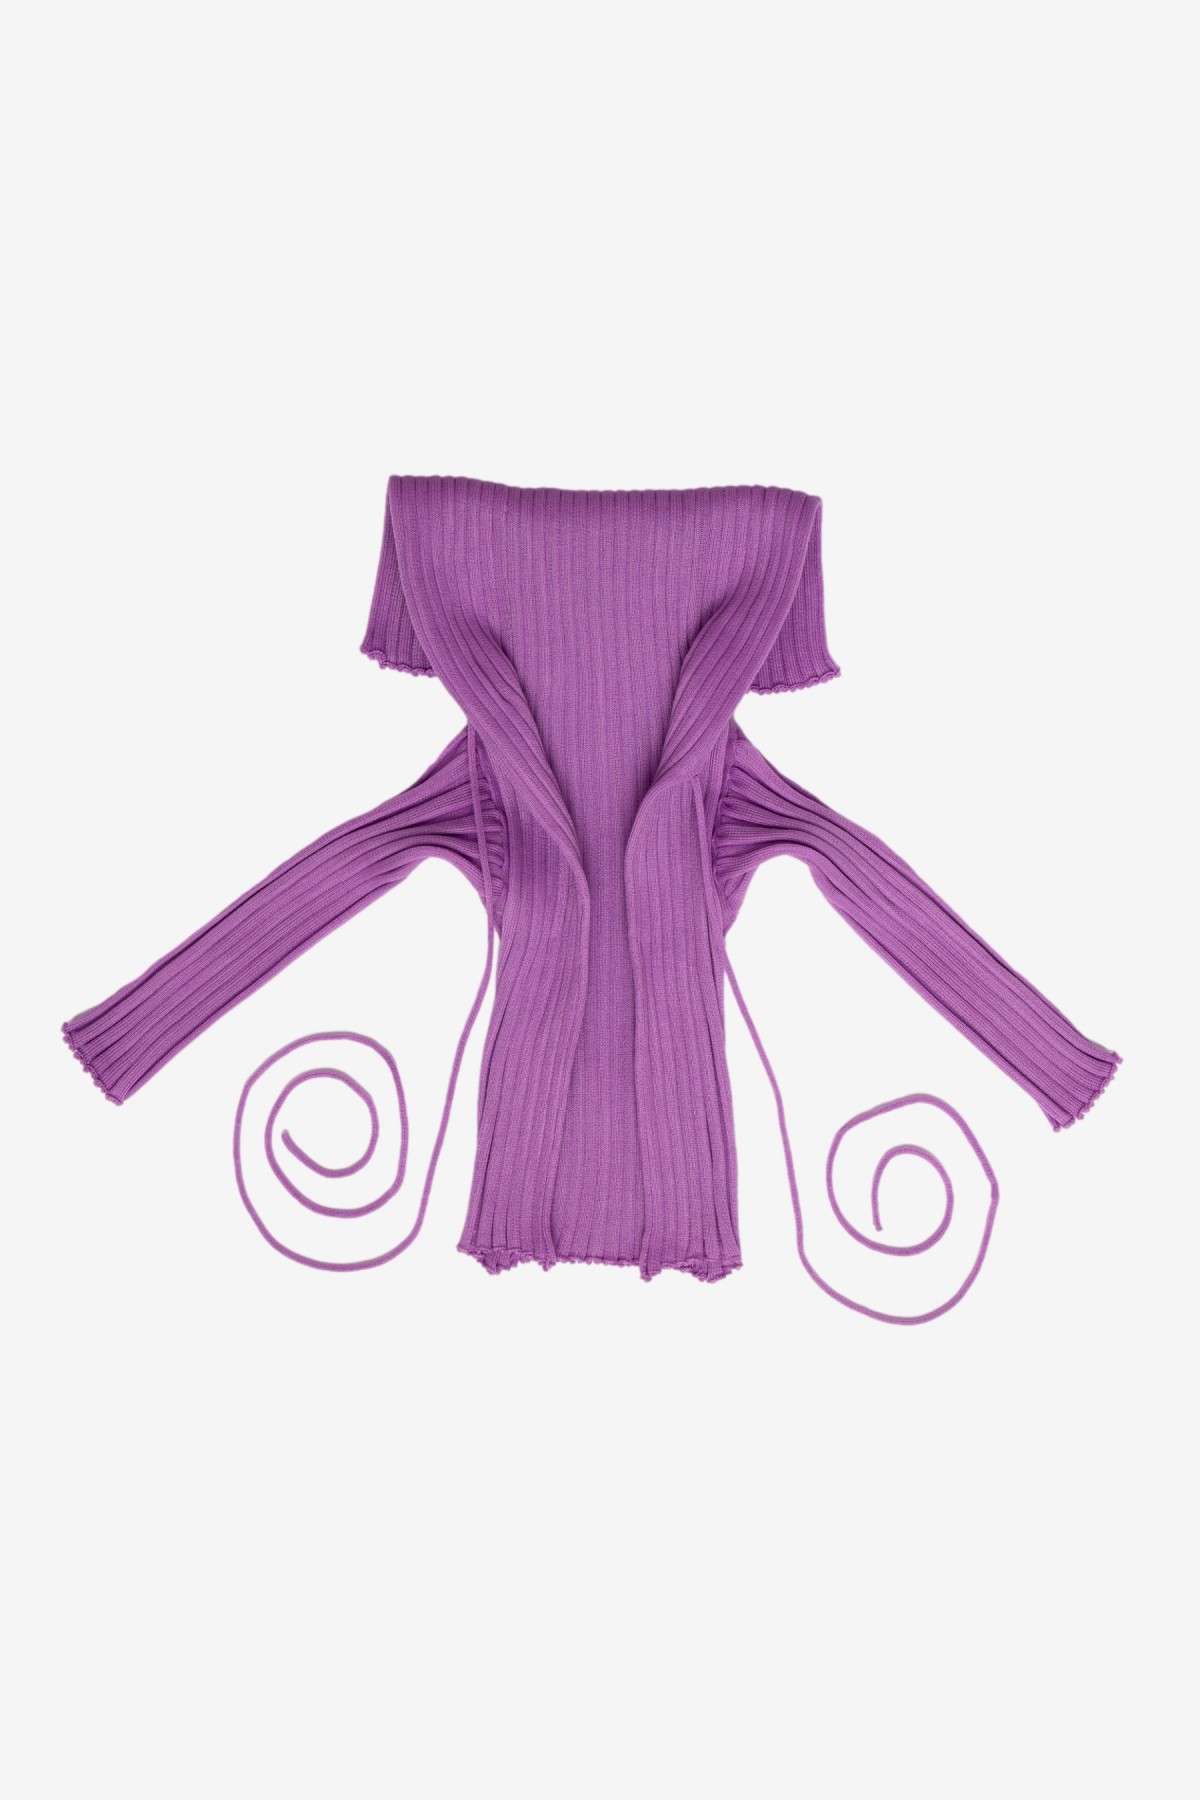 A. Roege Hove Ara Wide Collar Cardigan in Lilac